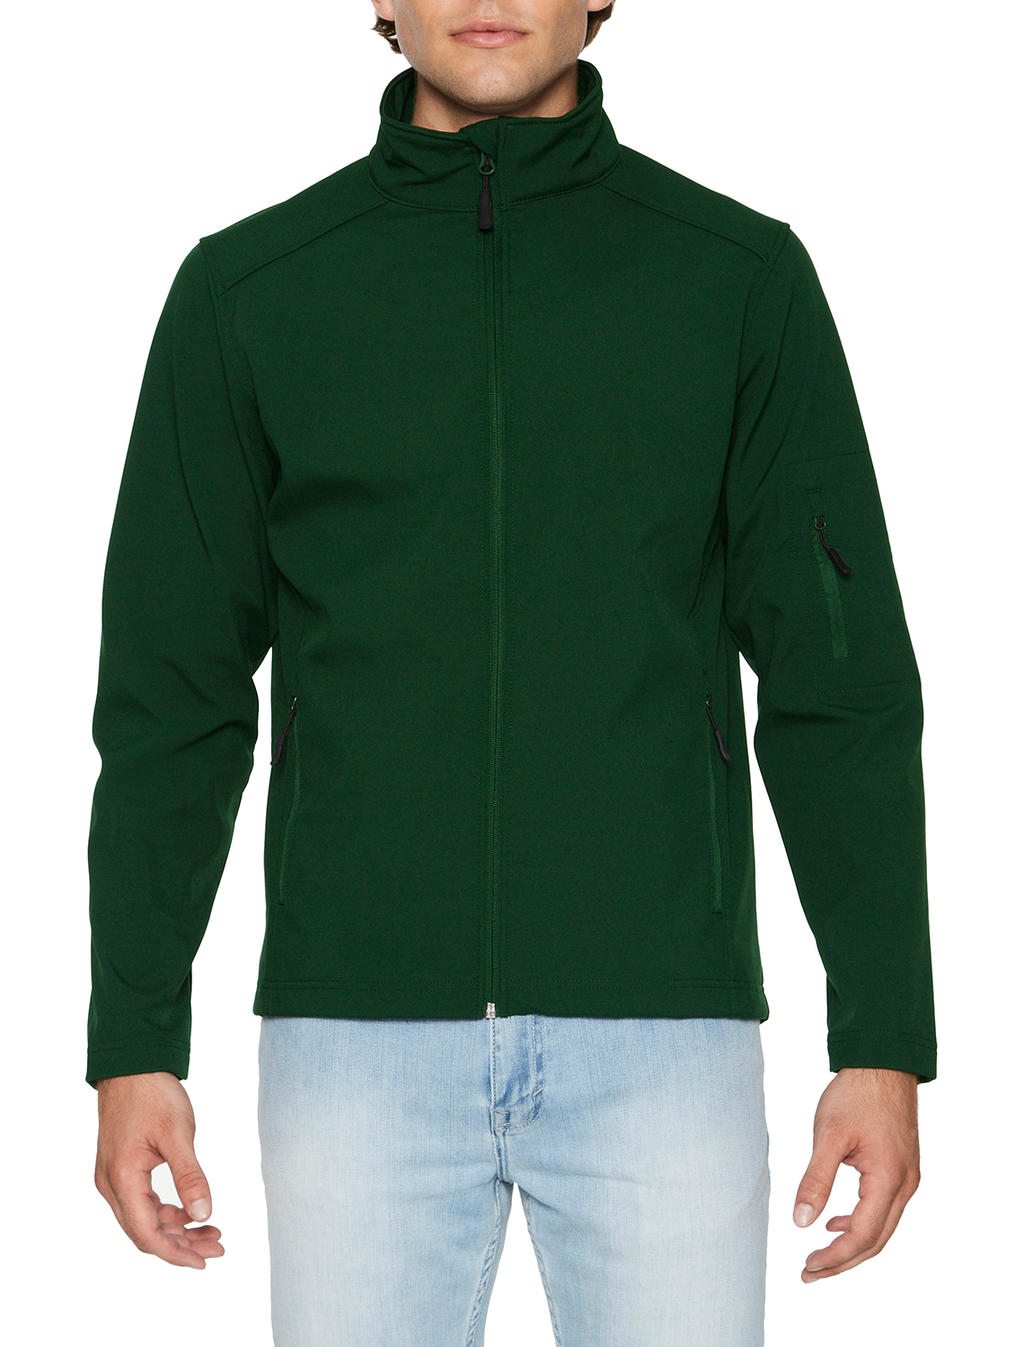  Hammer? Unisex Softshell Jacket in Farbe Forest Green